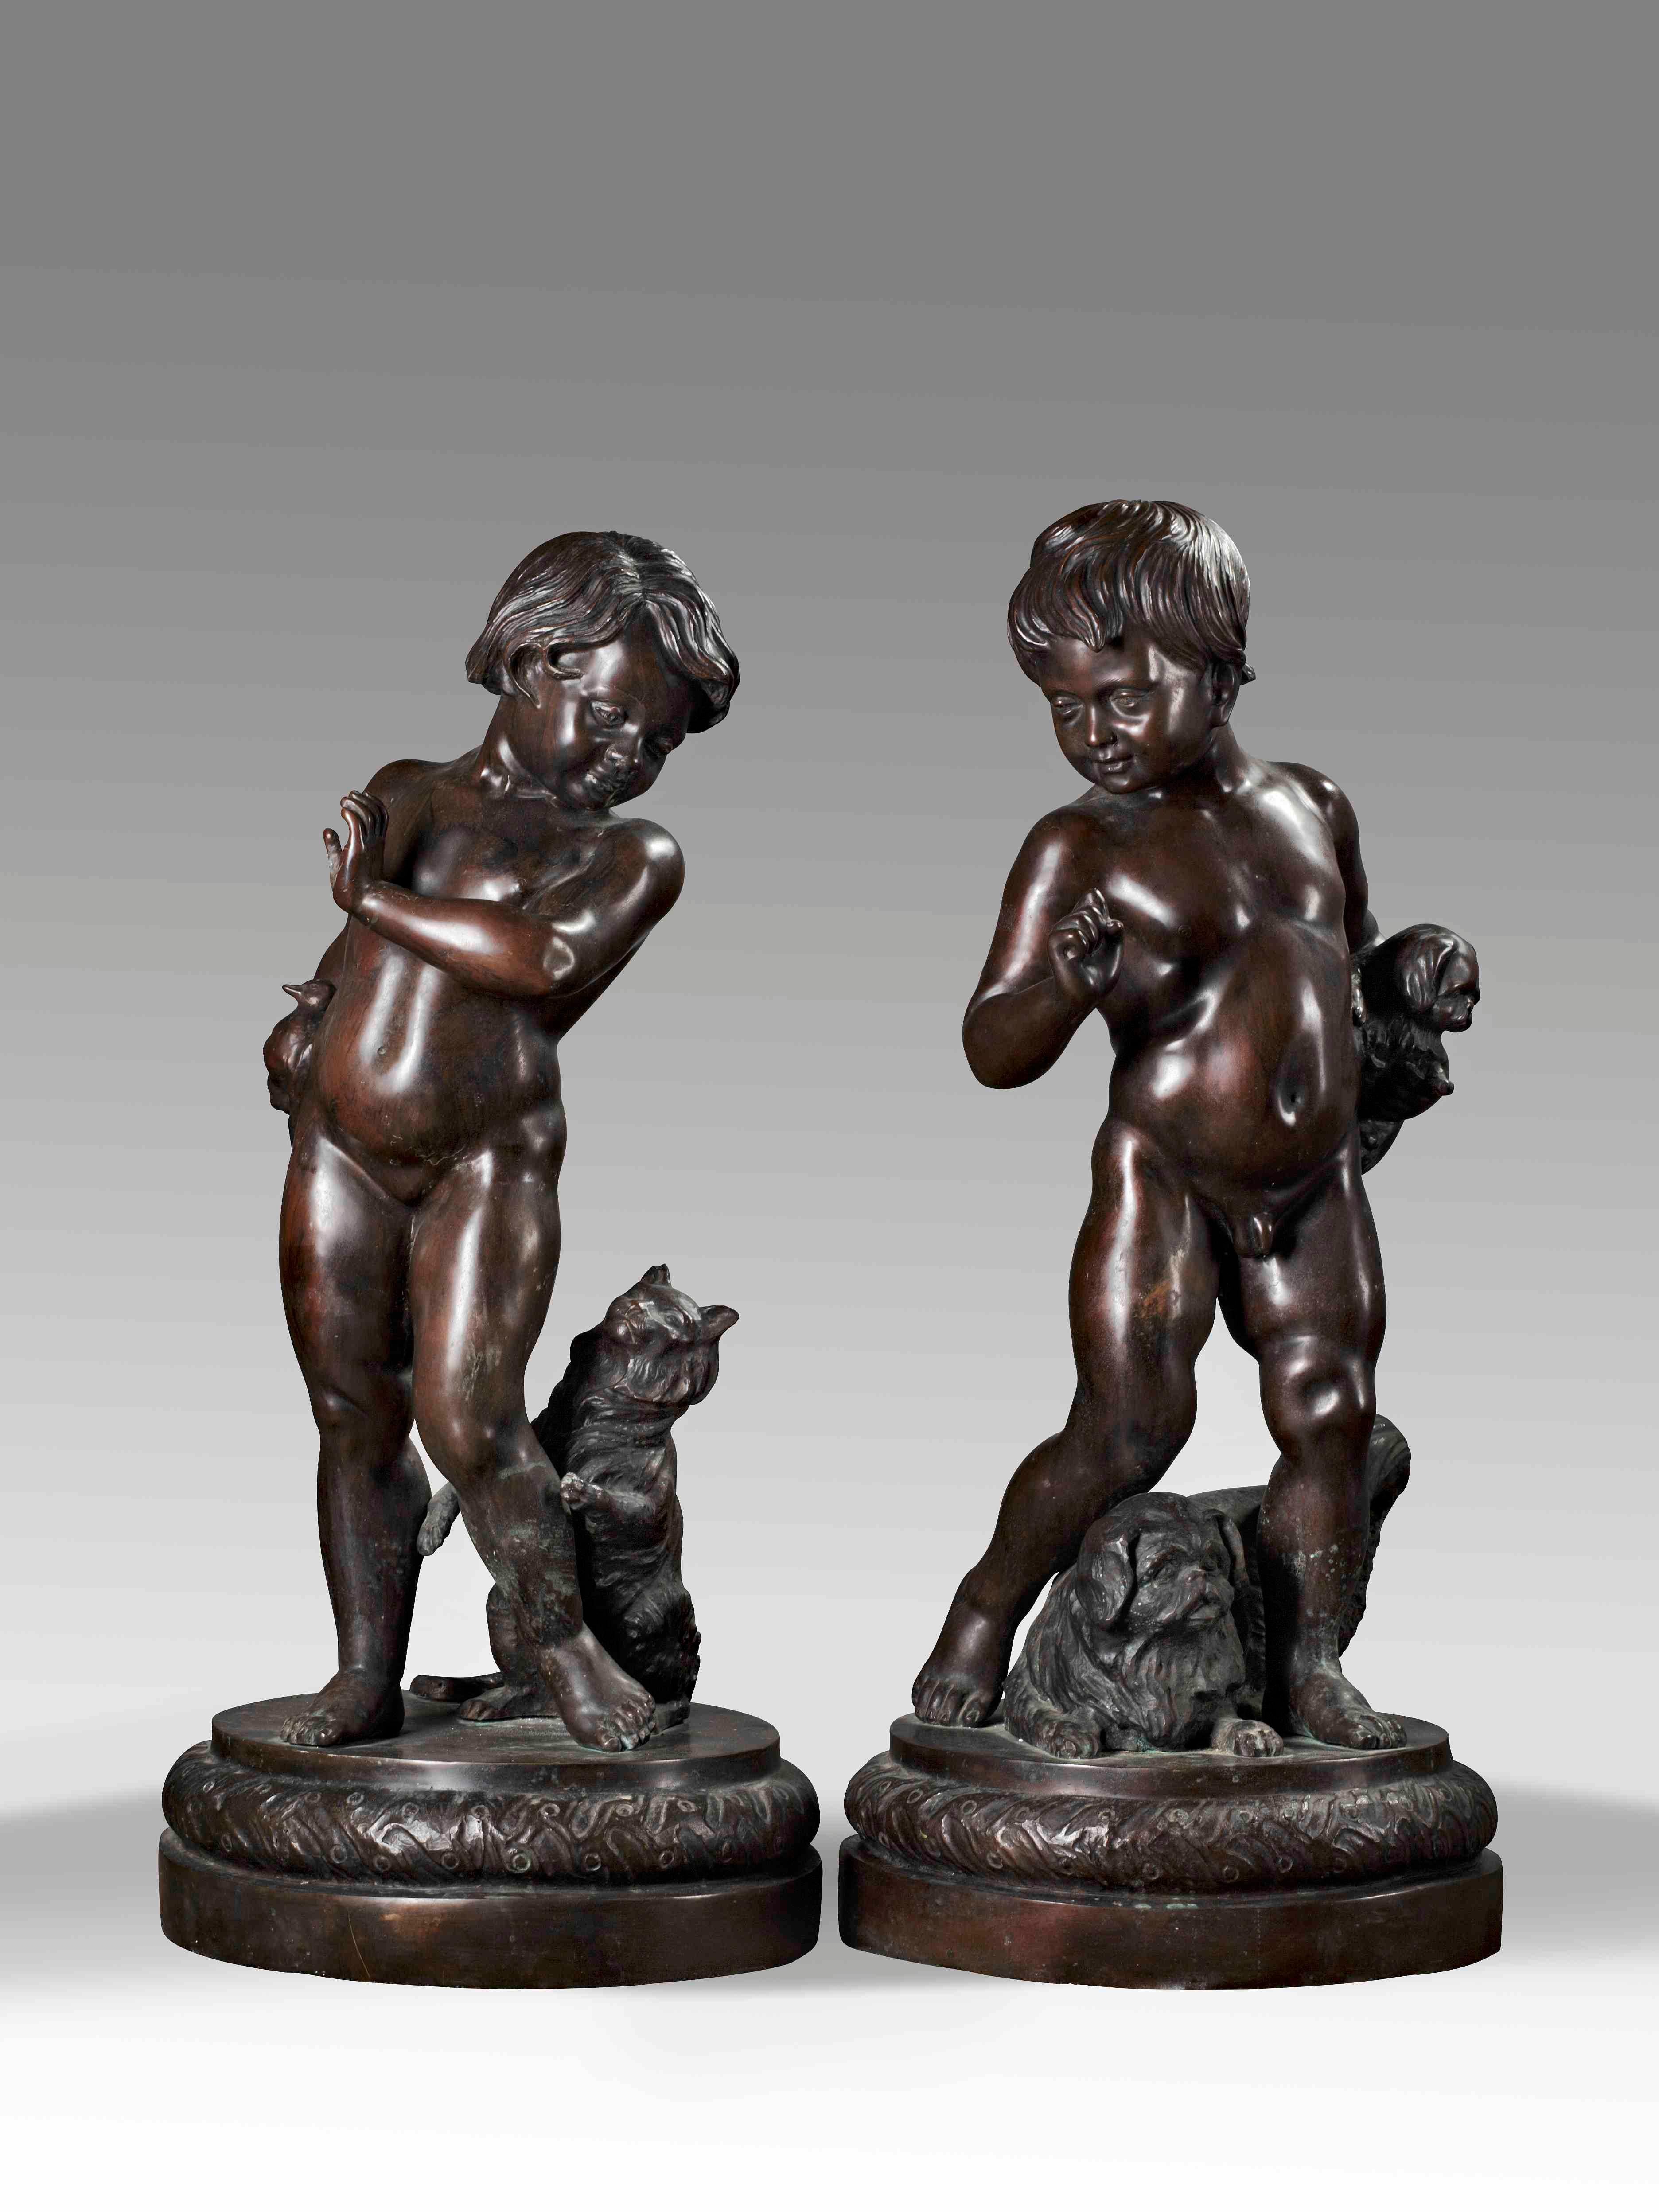 Pair of Neapolitan bronze sculptures of children with dogs. Beautifully made and patinated. Very decorative in an interior or in the garden. The sculptures were made in Napoli Italy by foundry Artistica Ruocco. Signed. Measures: 100 and 103 cm in